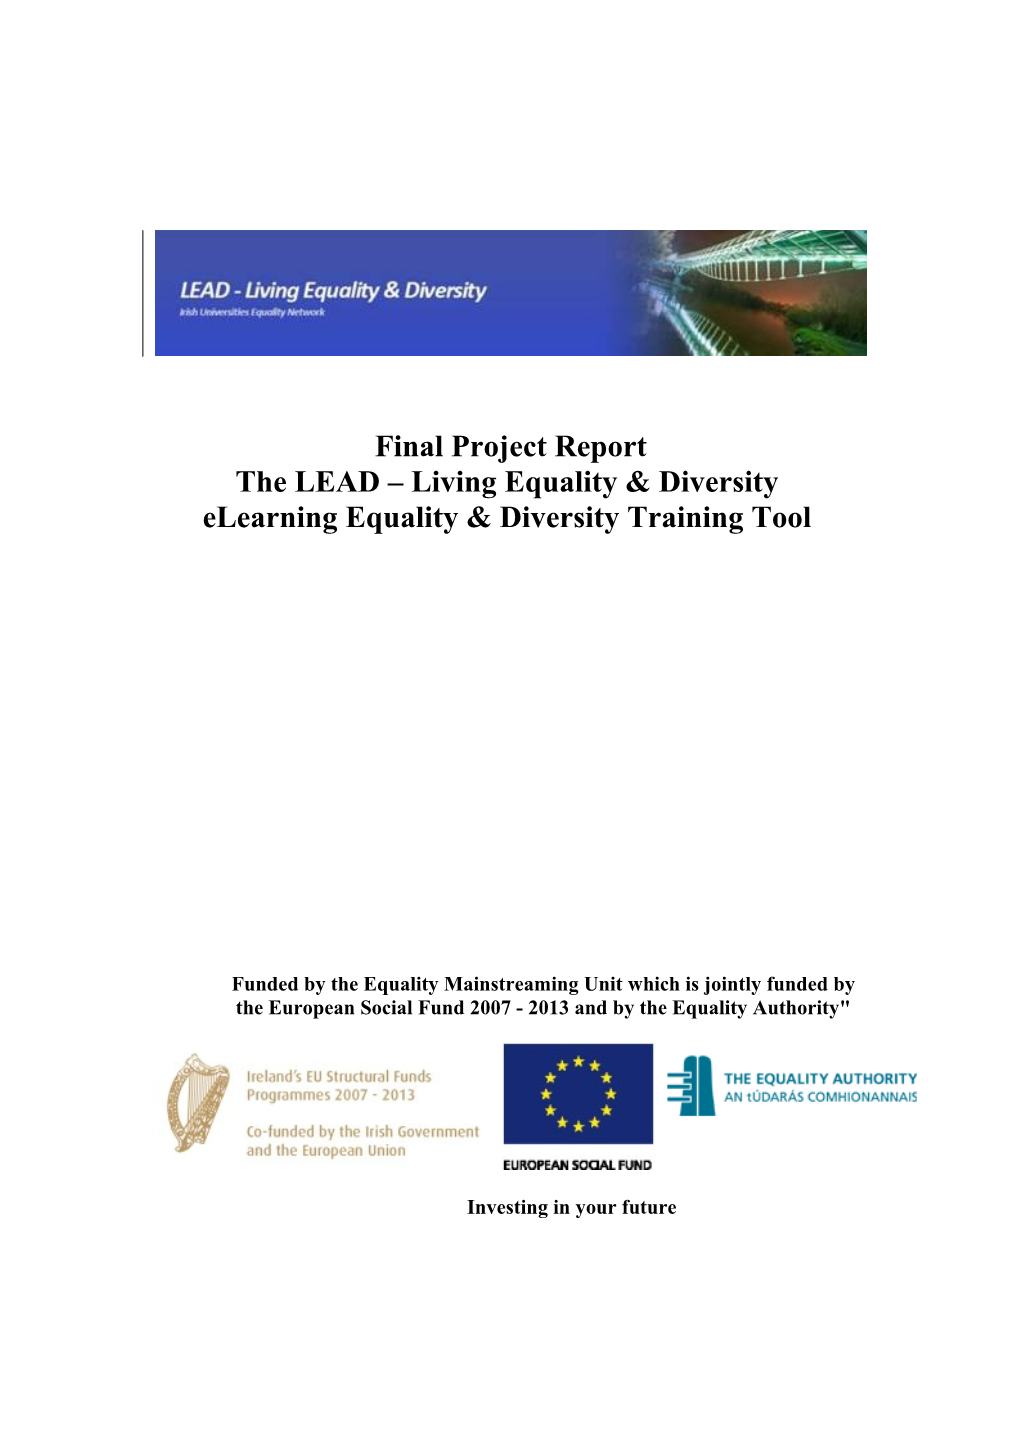 The LEAD Living Equality & Diversity